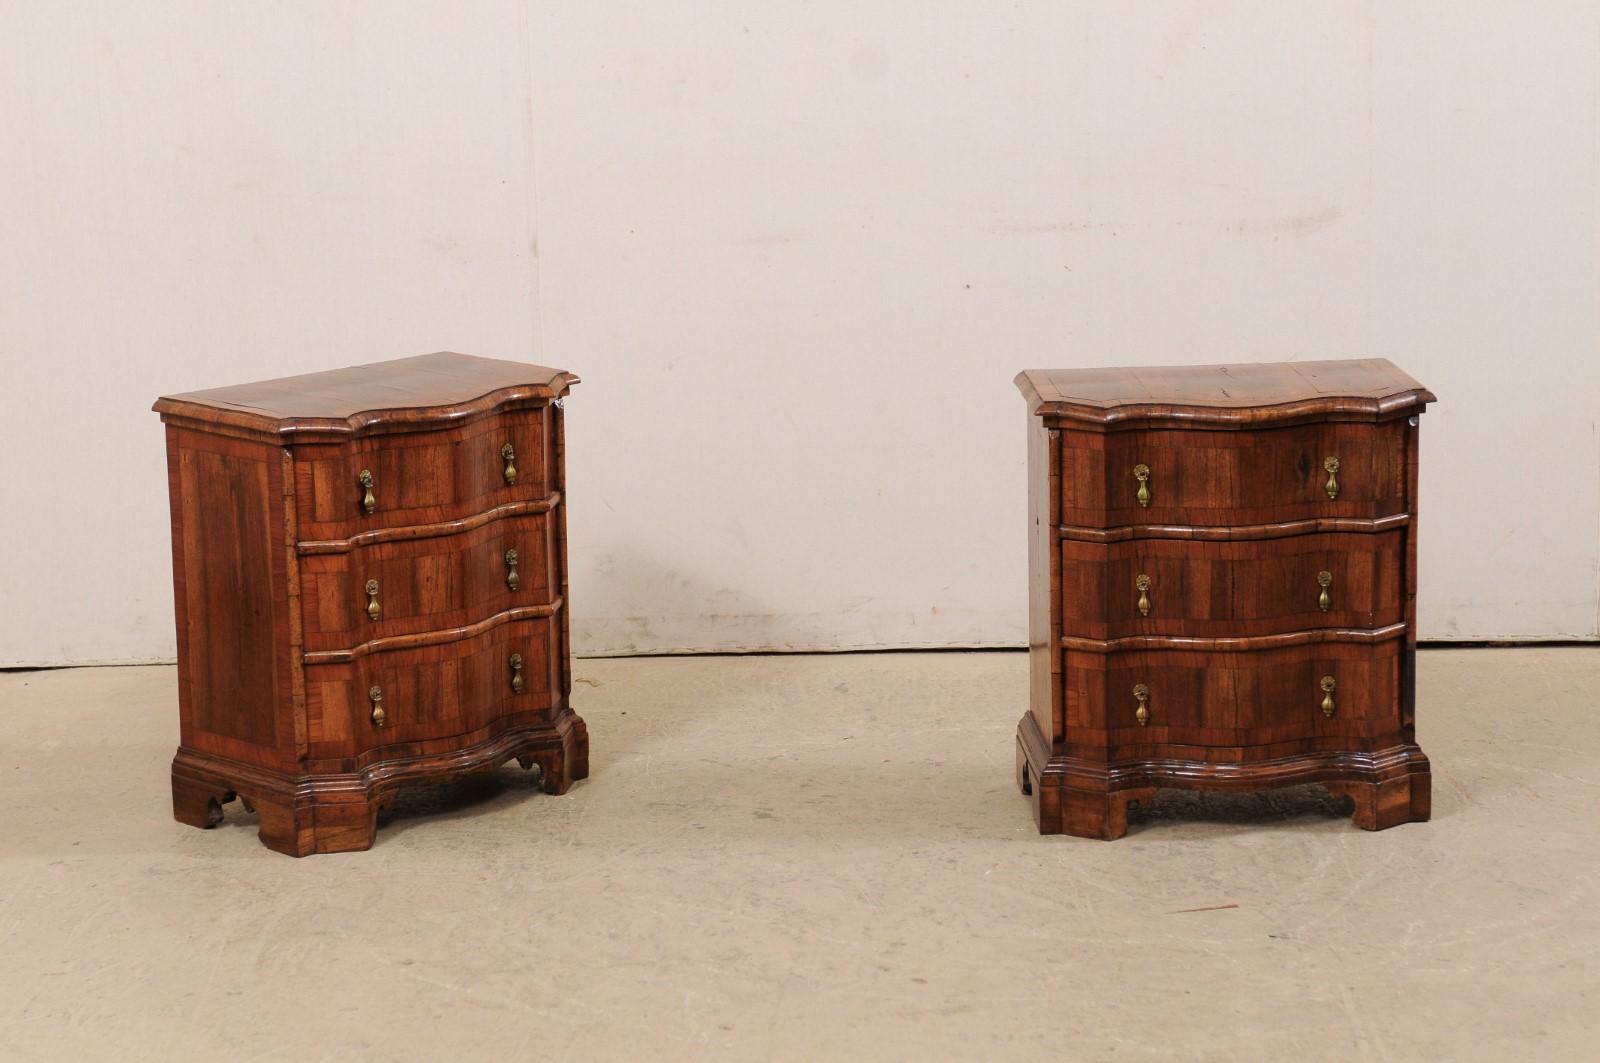 An Italian pair of small serpentine side chests with decorative banding from the turn of the 18th and 19th century. These exquisite petite-sized Italian chests each feature curvy serpentine bodies adorn in a lovely banding about the tops, sides, and